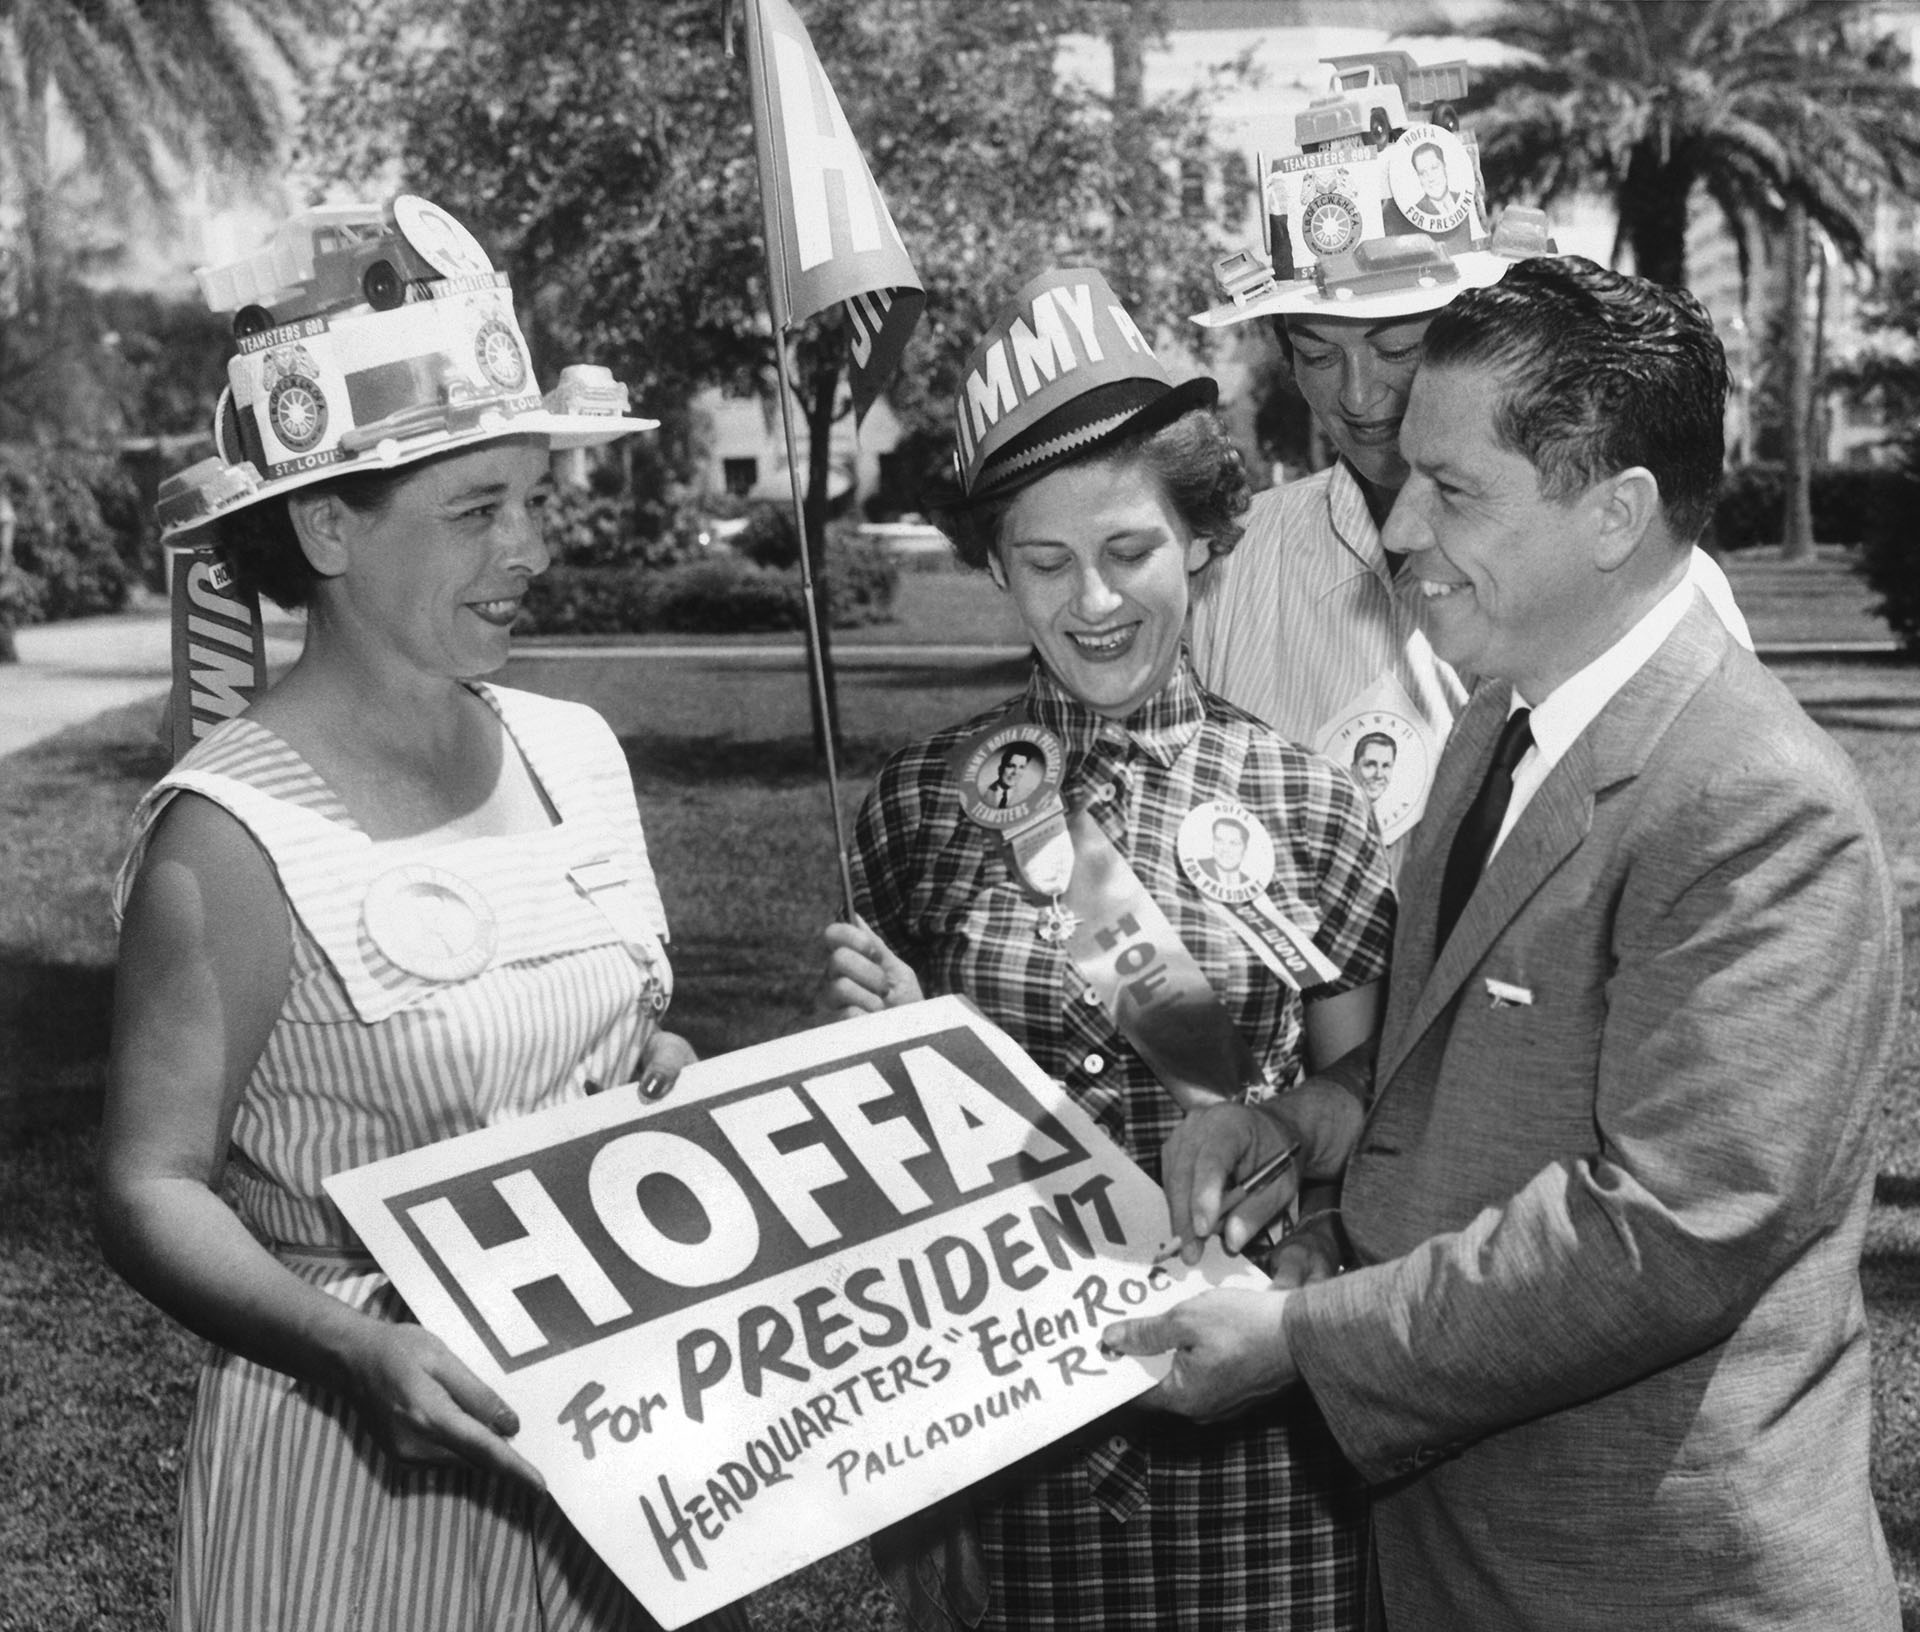 Teamsters union vice president JImmy Hoffa autographs a placard for him for a group of women campaigning for his run for president of the Teamsters, Miami Beach, Florida, October 1, 1957 (Photo by Underwood Archives/Getty Images)